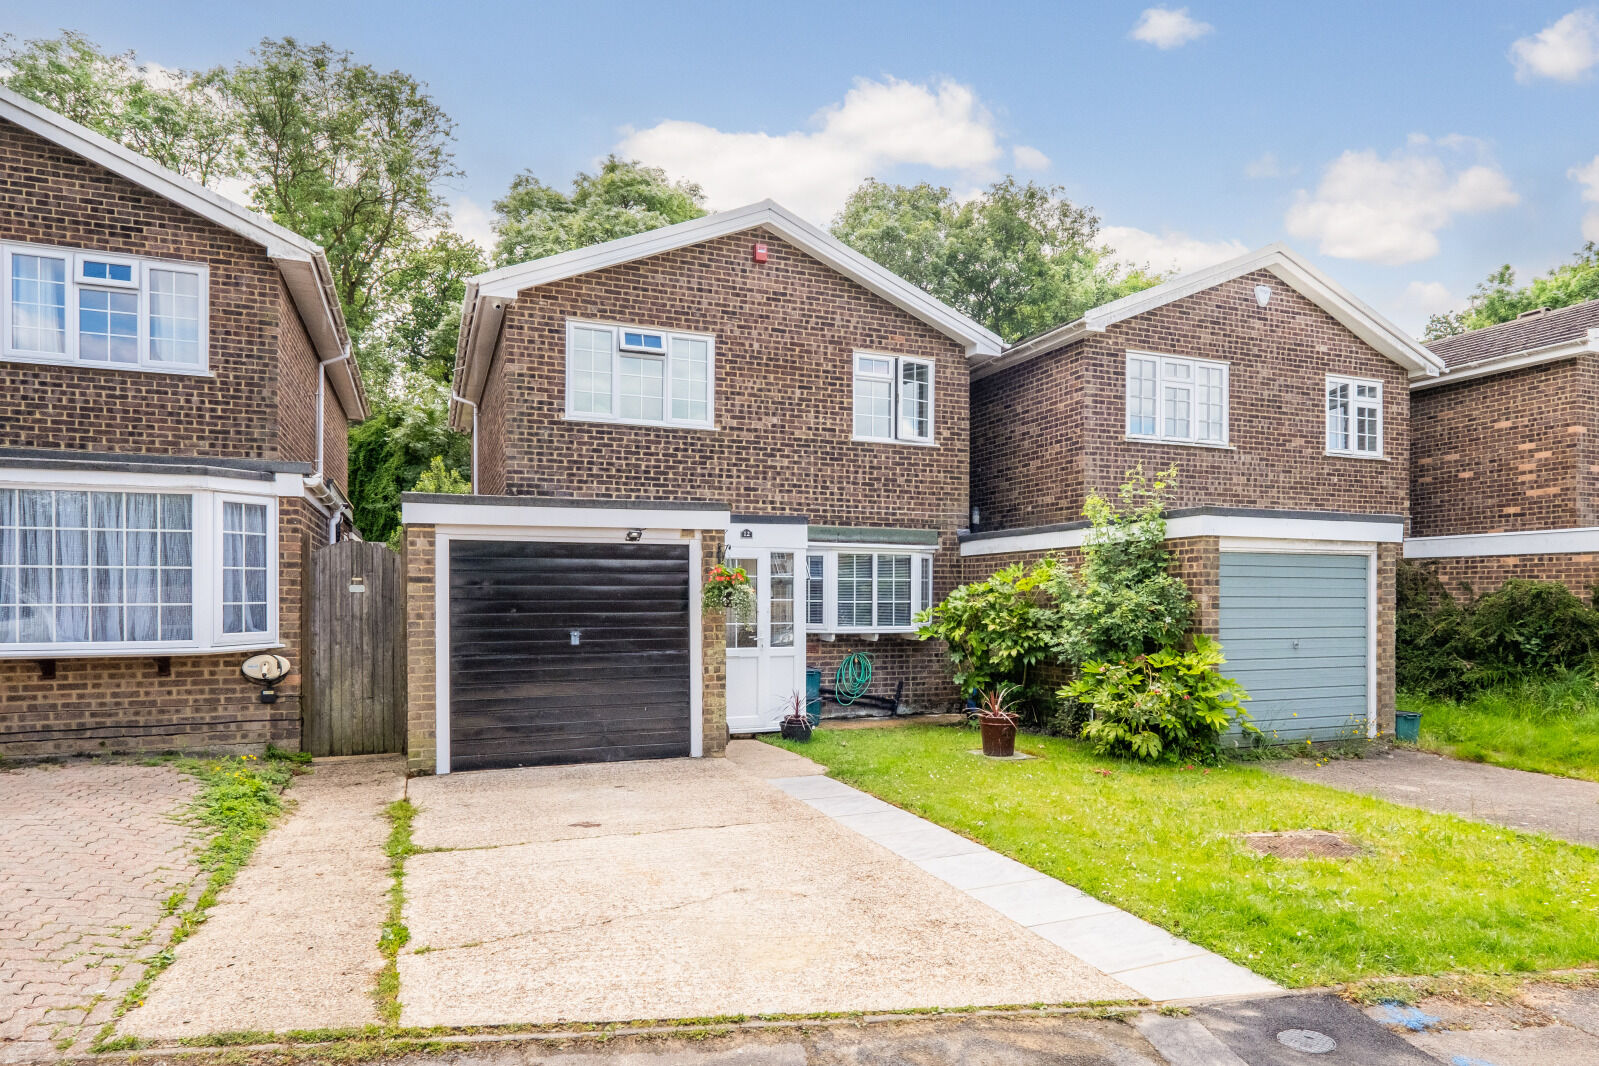 4 bedroom detached house for sale Ashmere Close, Cheam, SM3, main image